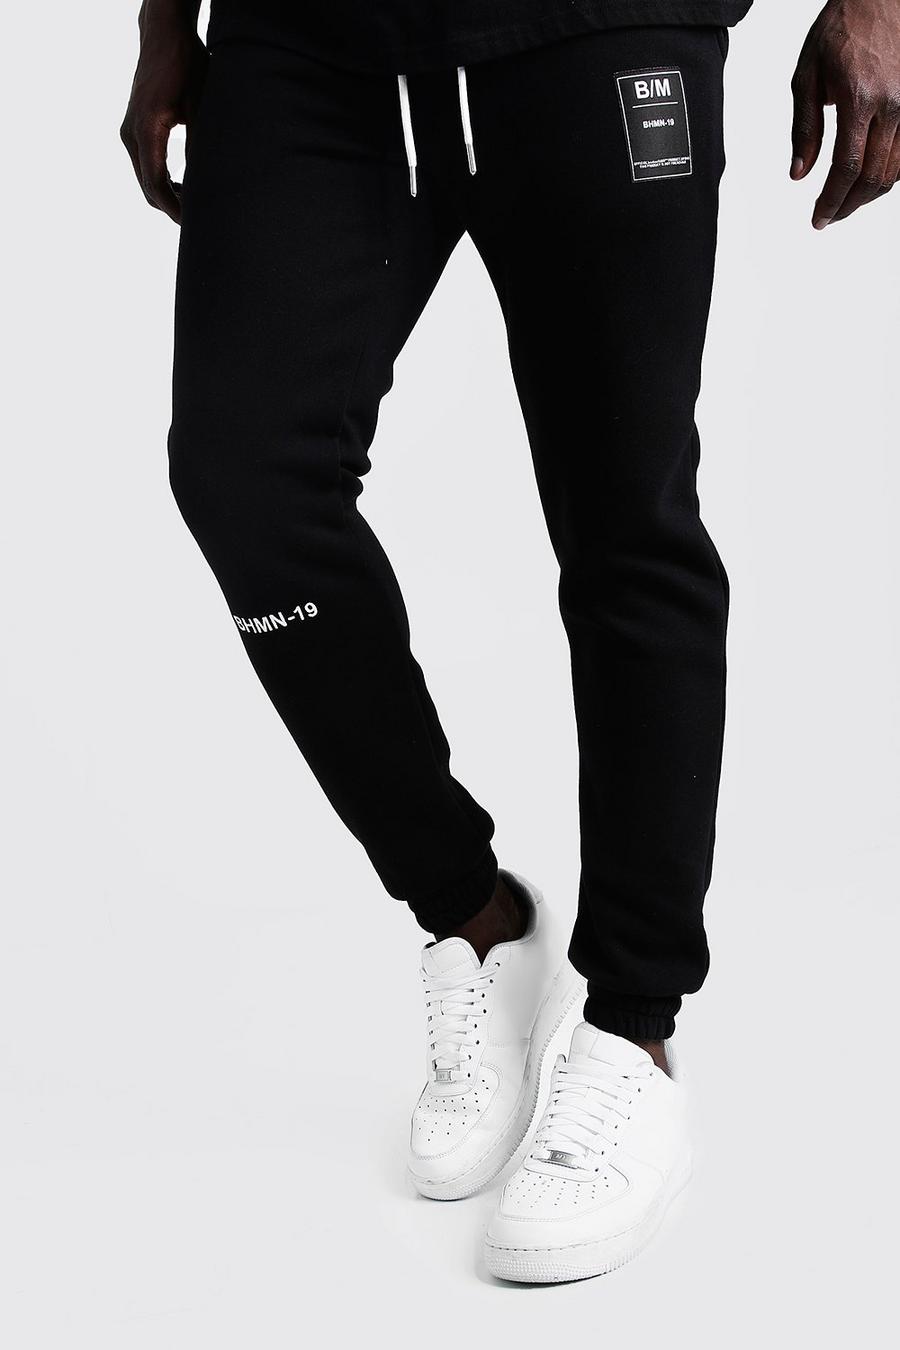 BHM-19 Embroidered Joggers With Woven Badge image number 1